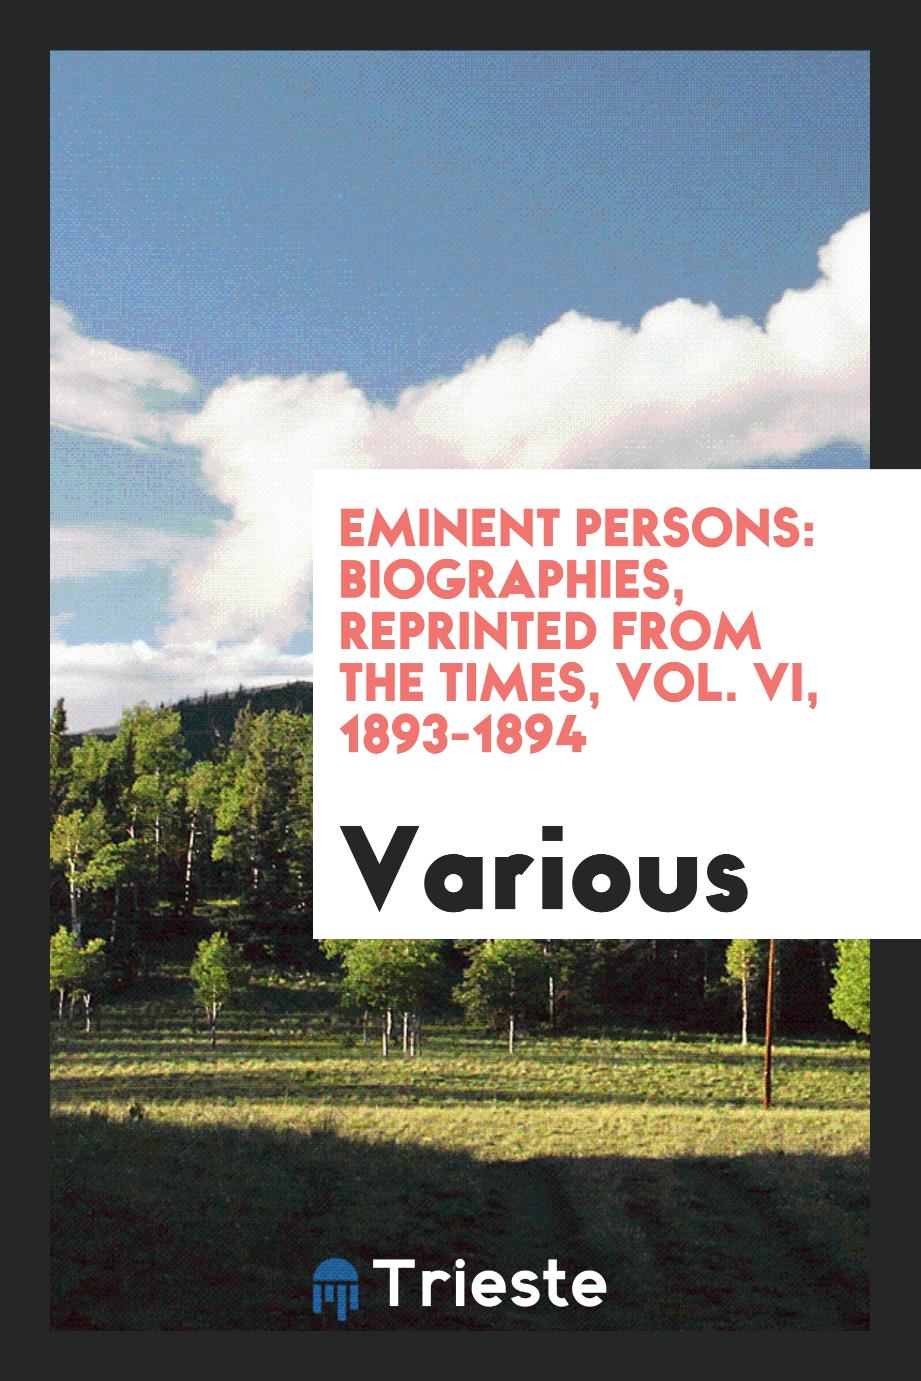 Eminent persons: biographies, reprinted from the Times, Vol. VI, 1893-1894